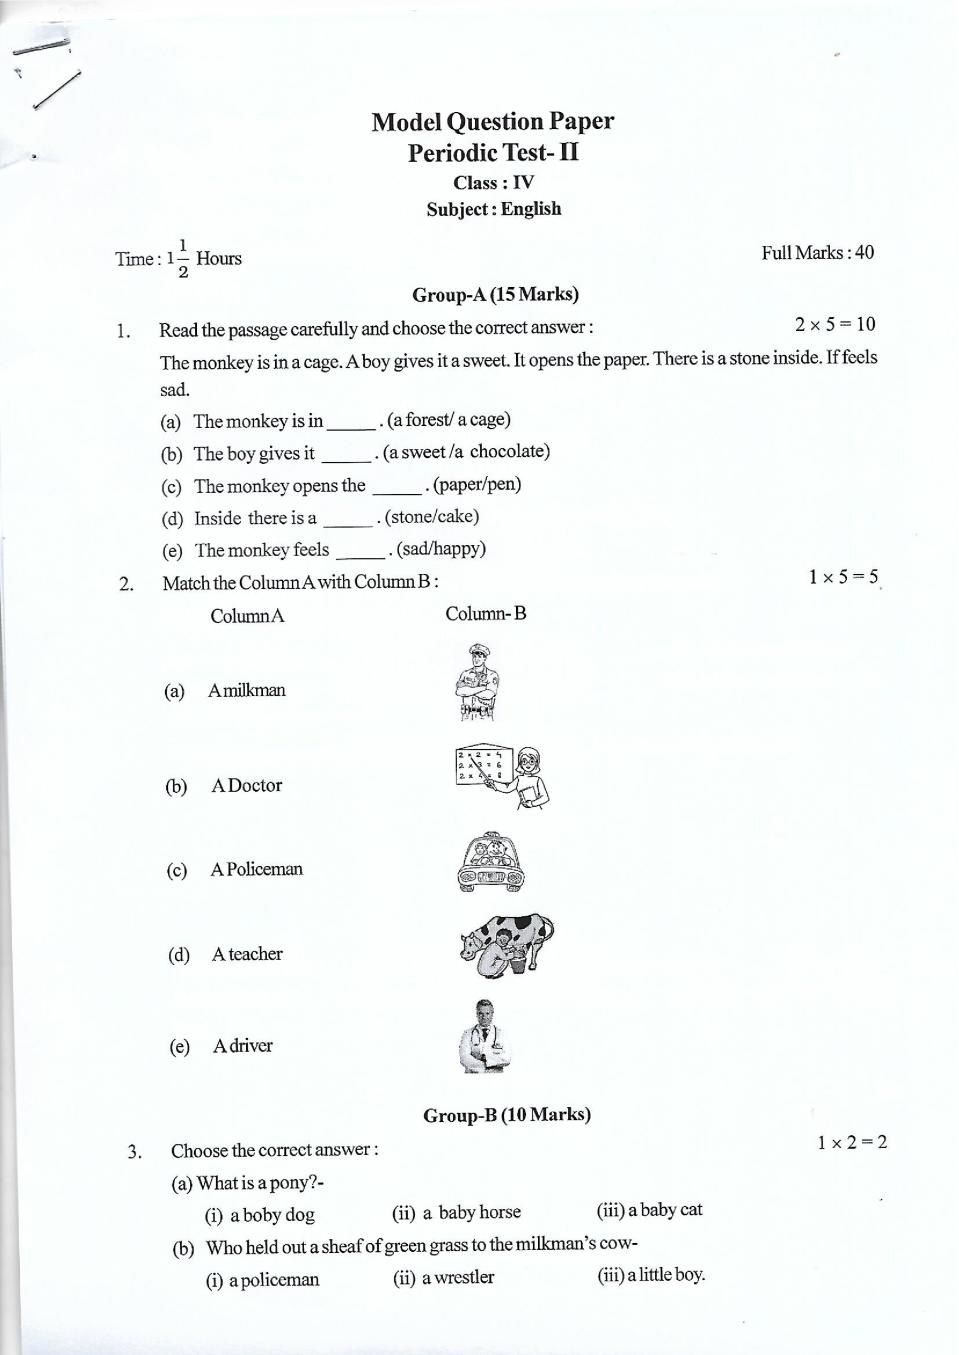 Tripura Board Model Question Paper for Class 4 Annual Exam - Page 1